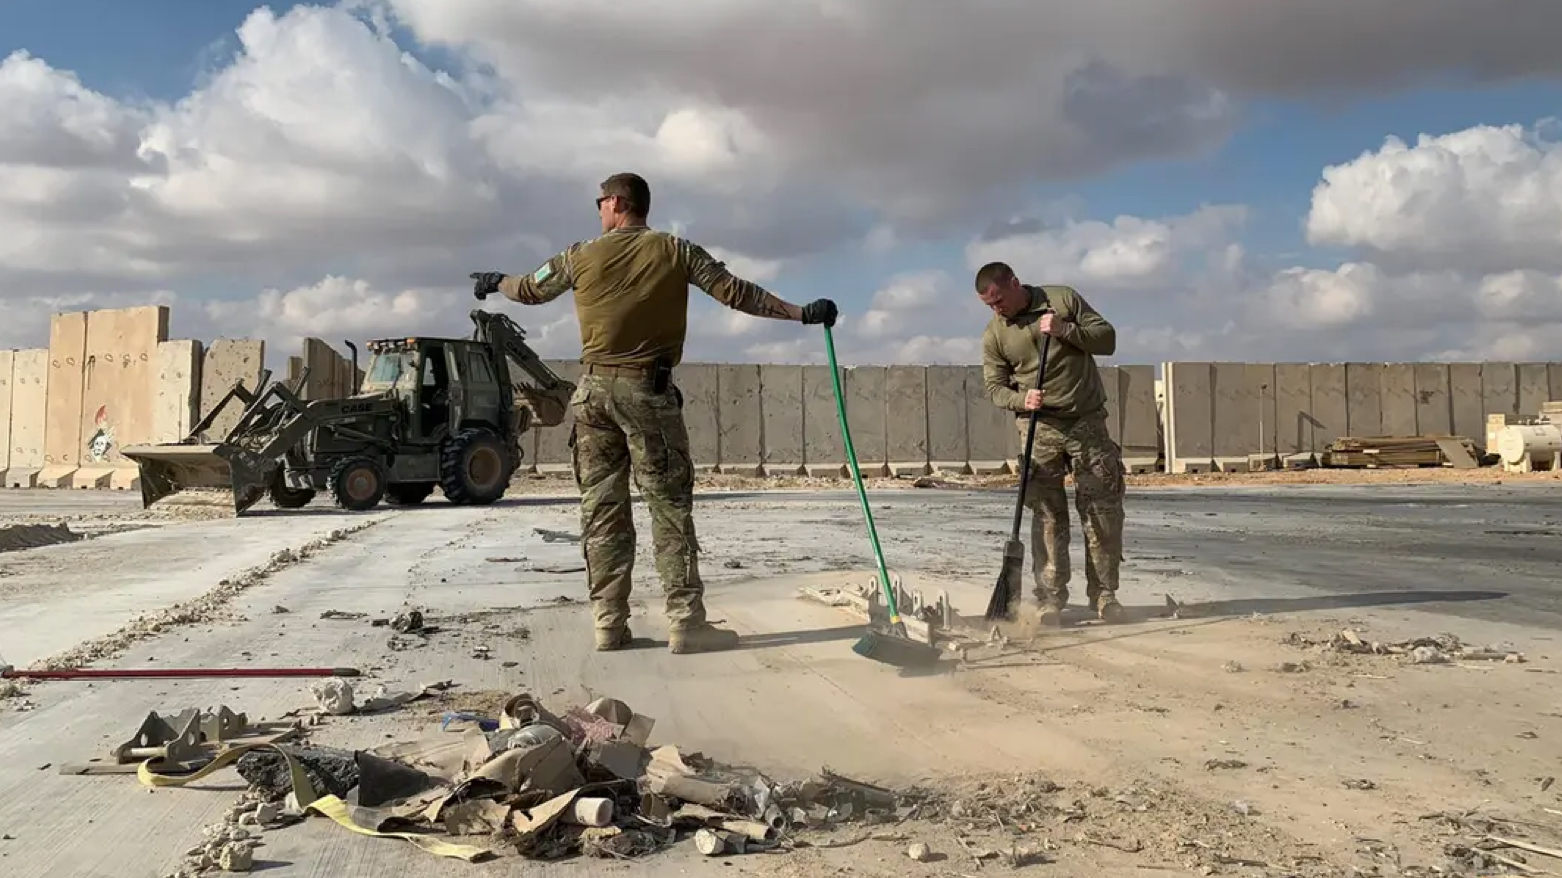 U.S. soldiers clearing rubble at Al-Asad military airbase in the western Iraqi province of Anbar on January 13, 2020. (Photo: AFP)